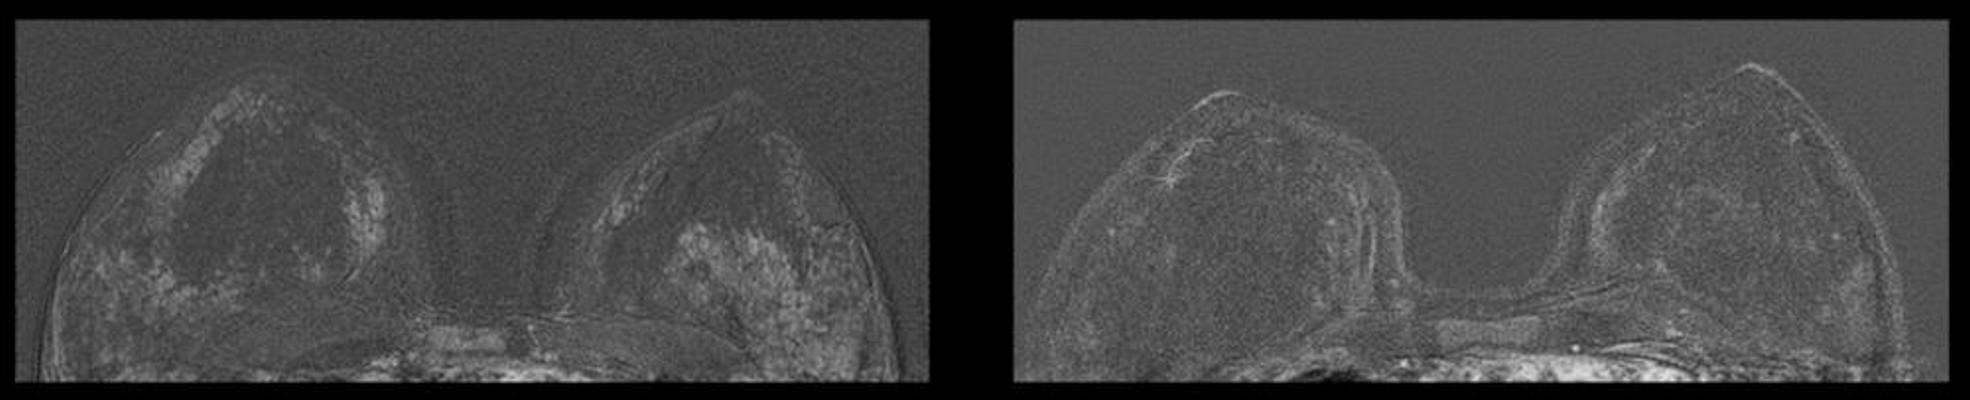 Breast MRI of a 45-year-old patient with IUD in place and 32 months after IUD removal